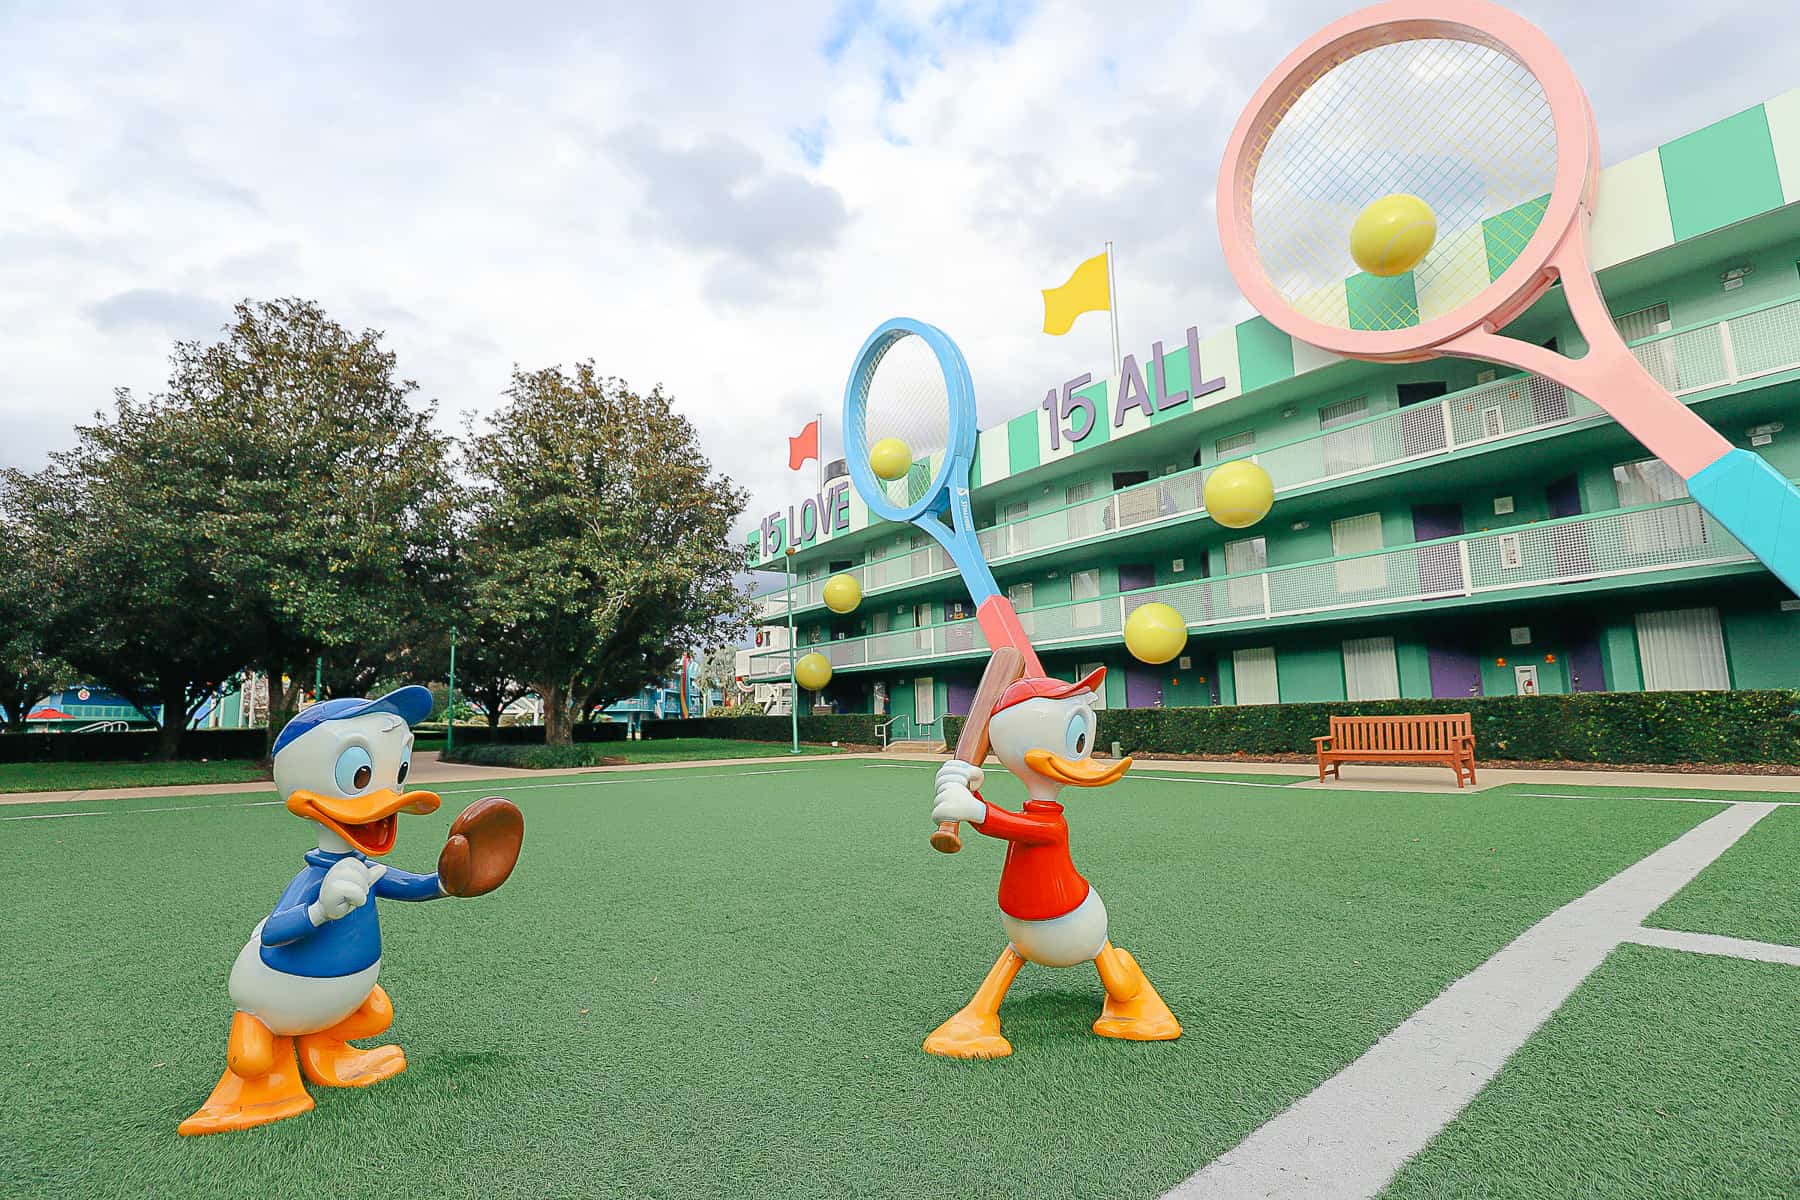 Donald's nephews playing ball on the tennis court at All-Star Sports.